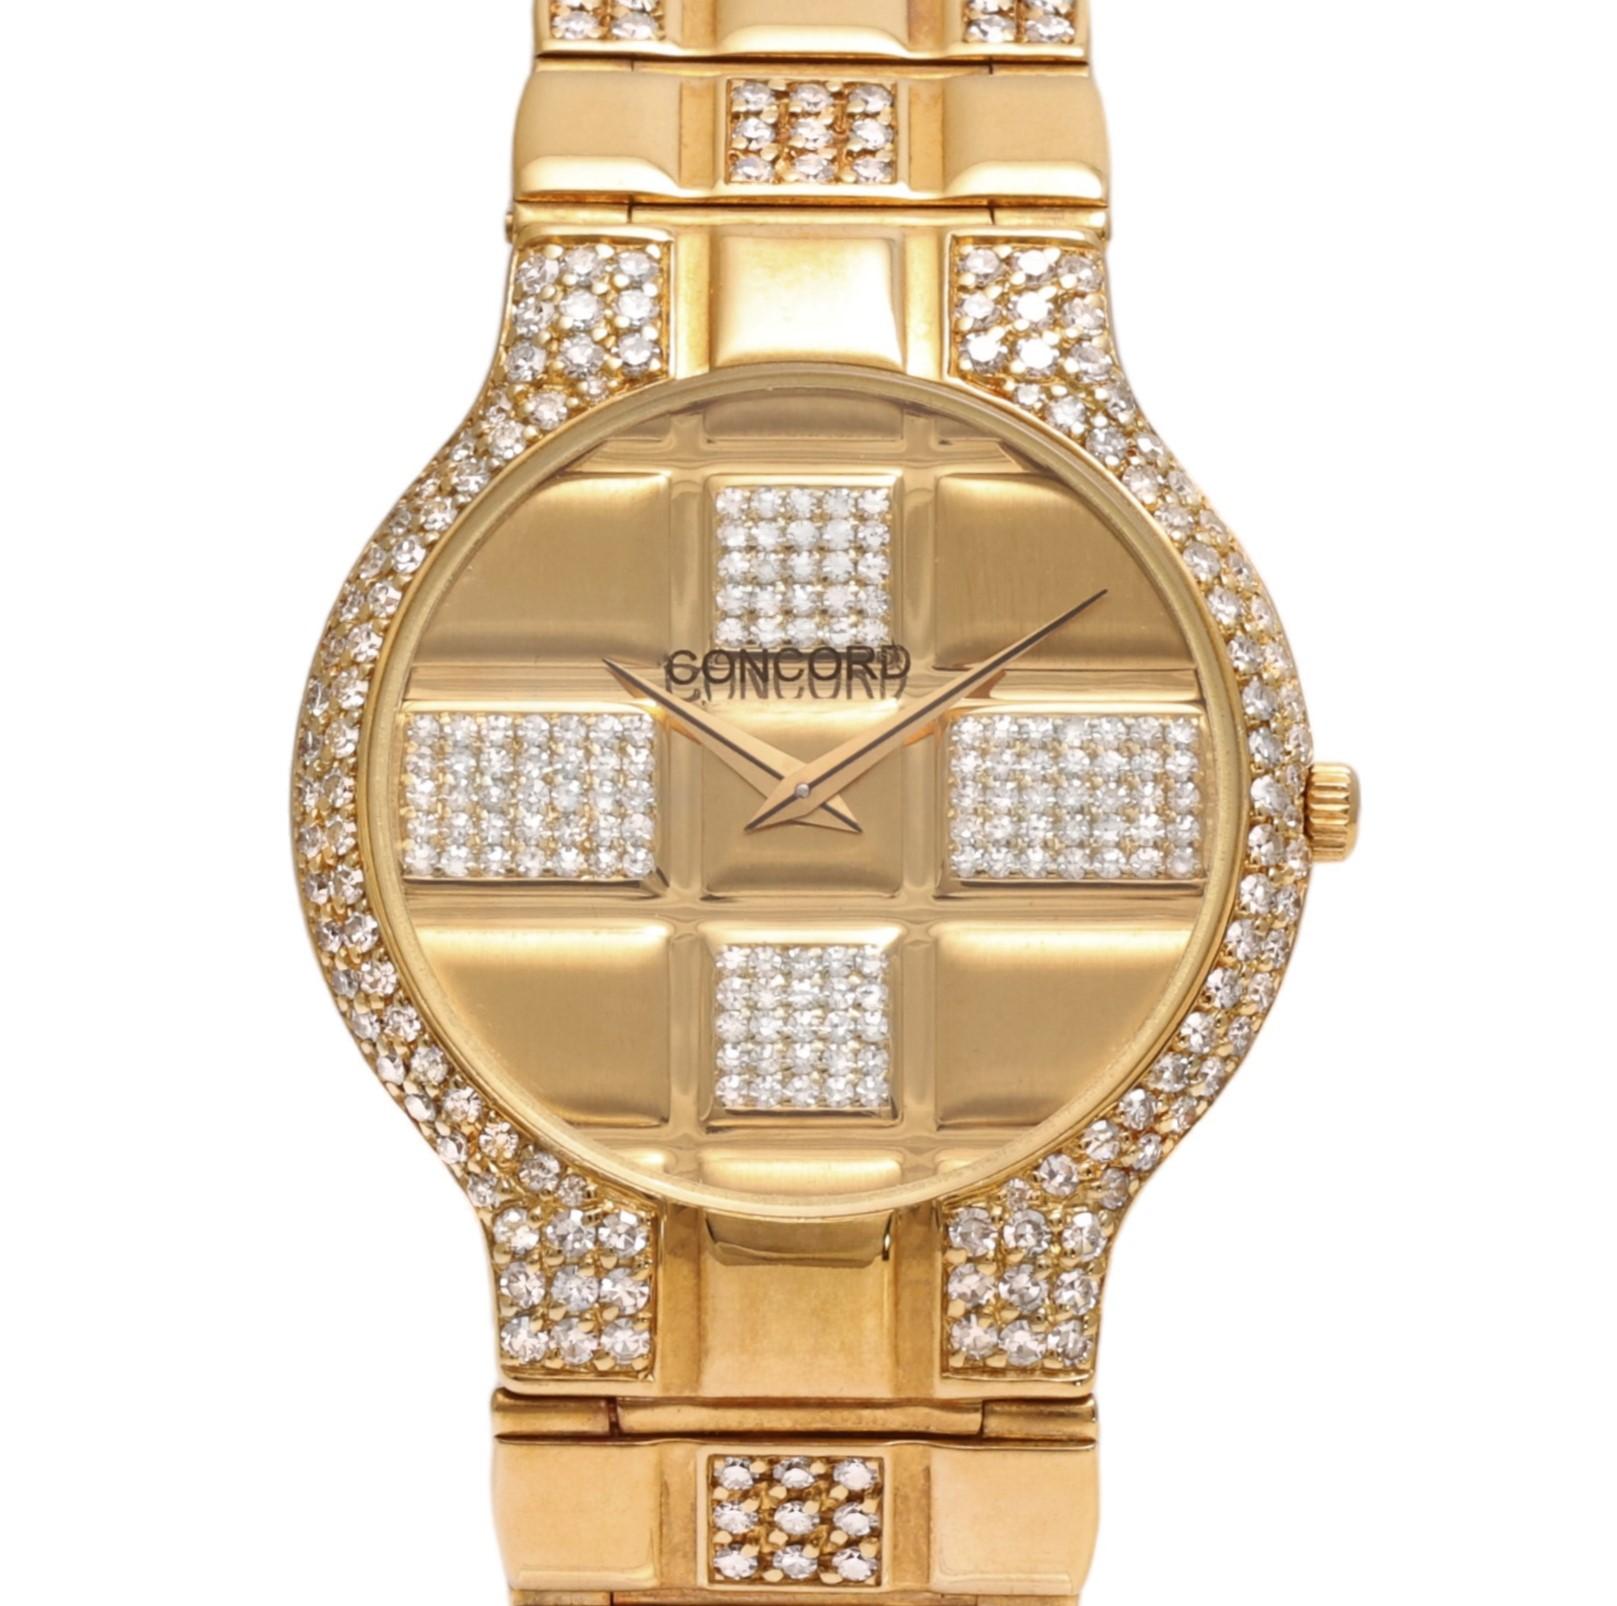 18 Kt. Solid Gold & Diamonds Concord Wrist Watch

Movement: Quartz

Case: 18 kt. Yellow gold, diameter 31 mm, thickness 5 mm, Bezel set with diamonds

Dial: Gold dial set with diamonds

Strap: 18 kt. yellow gold strap with diamonds, Will max fit a